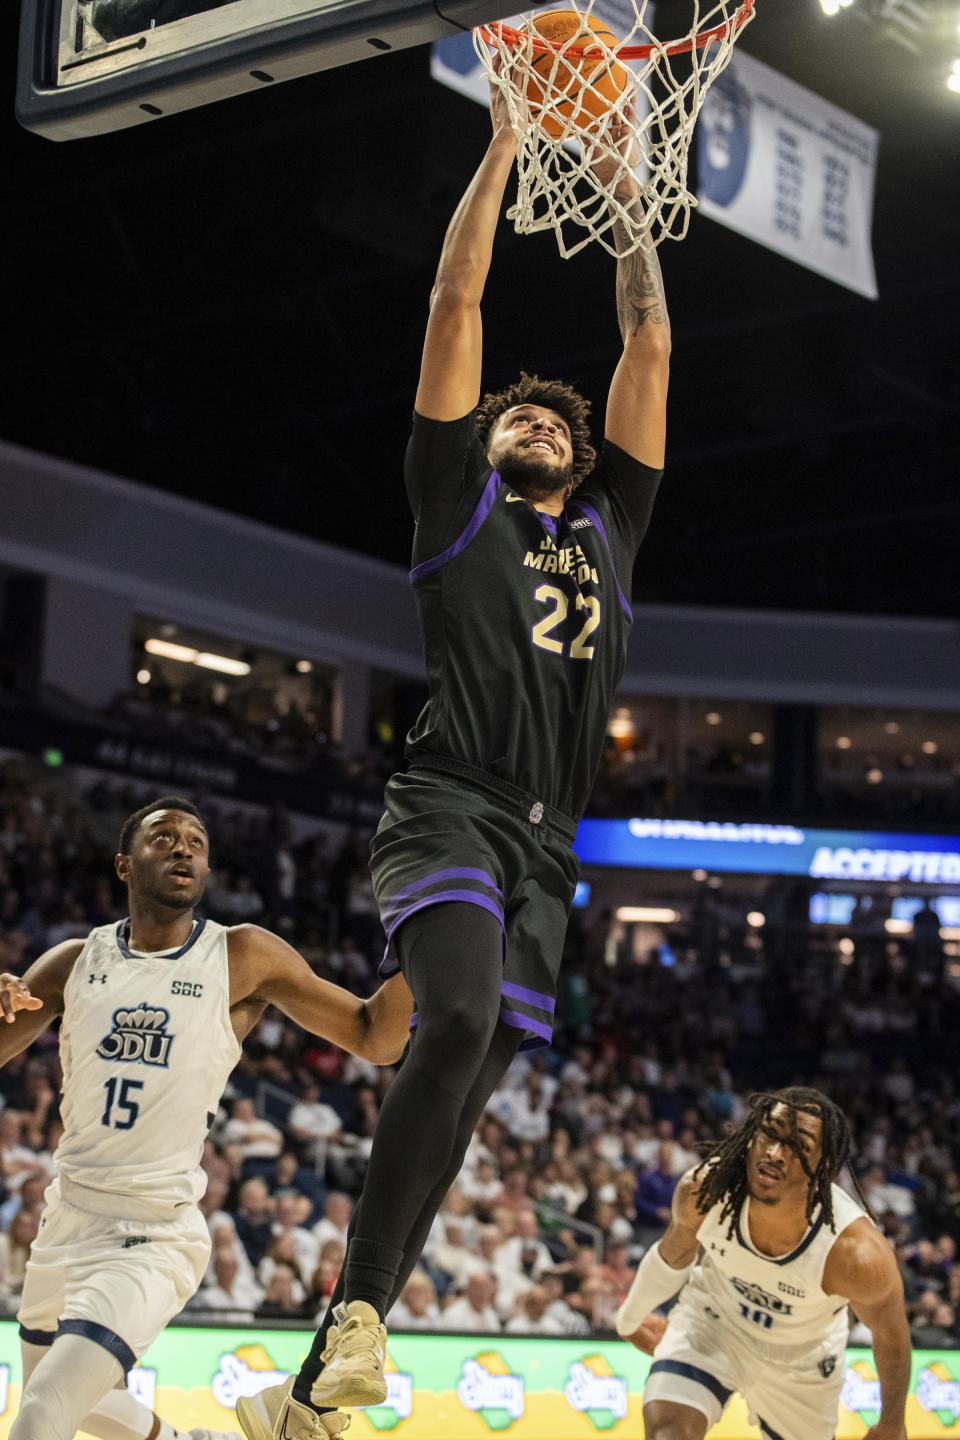 James Madison forward Julien Wooden (22) dunks against Old Dominion guards R.J. Blakney (15) and Williams (10) during the first half of an NCAA college basketball game Saturday, Dec. 9, 2023, in Norfolk, Va. (AP Photo/Mike Caudill)